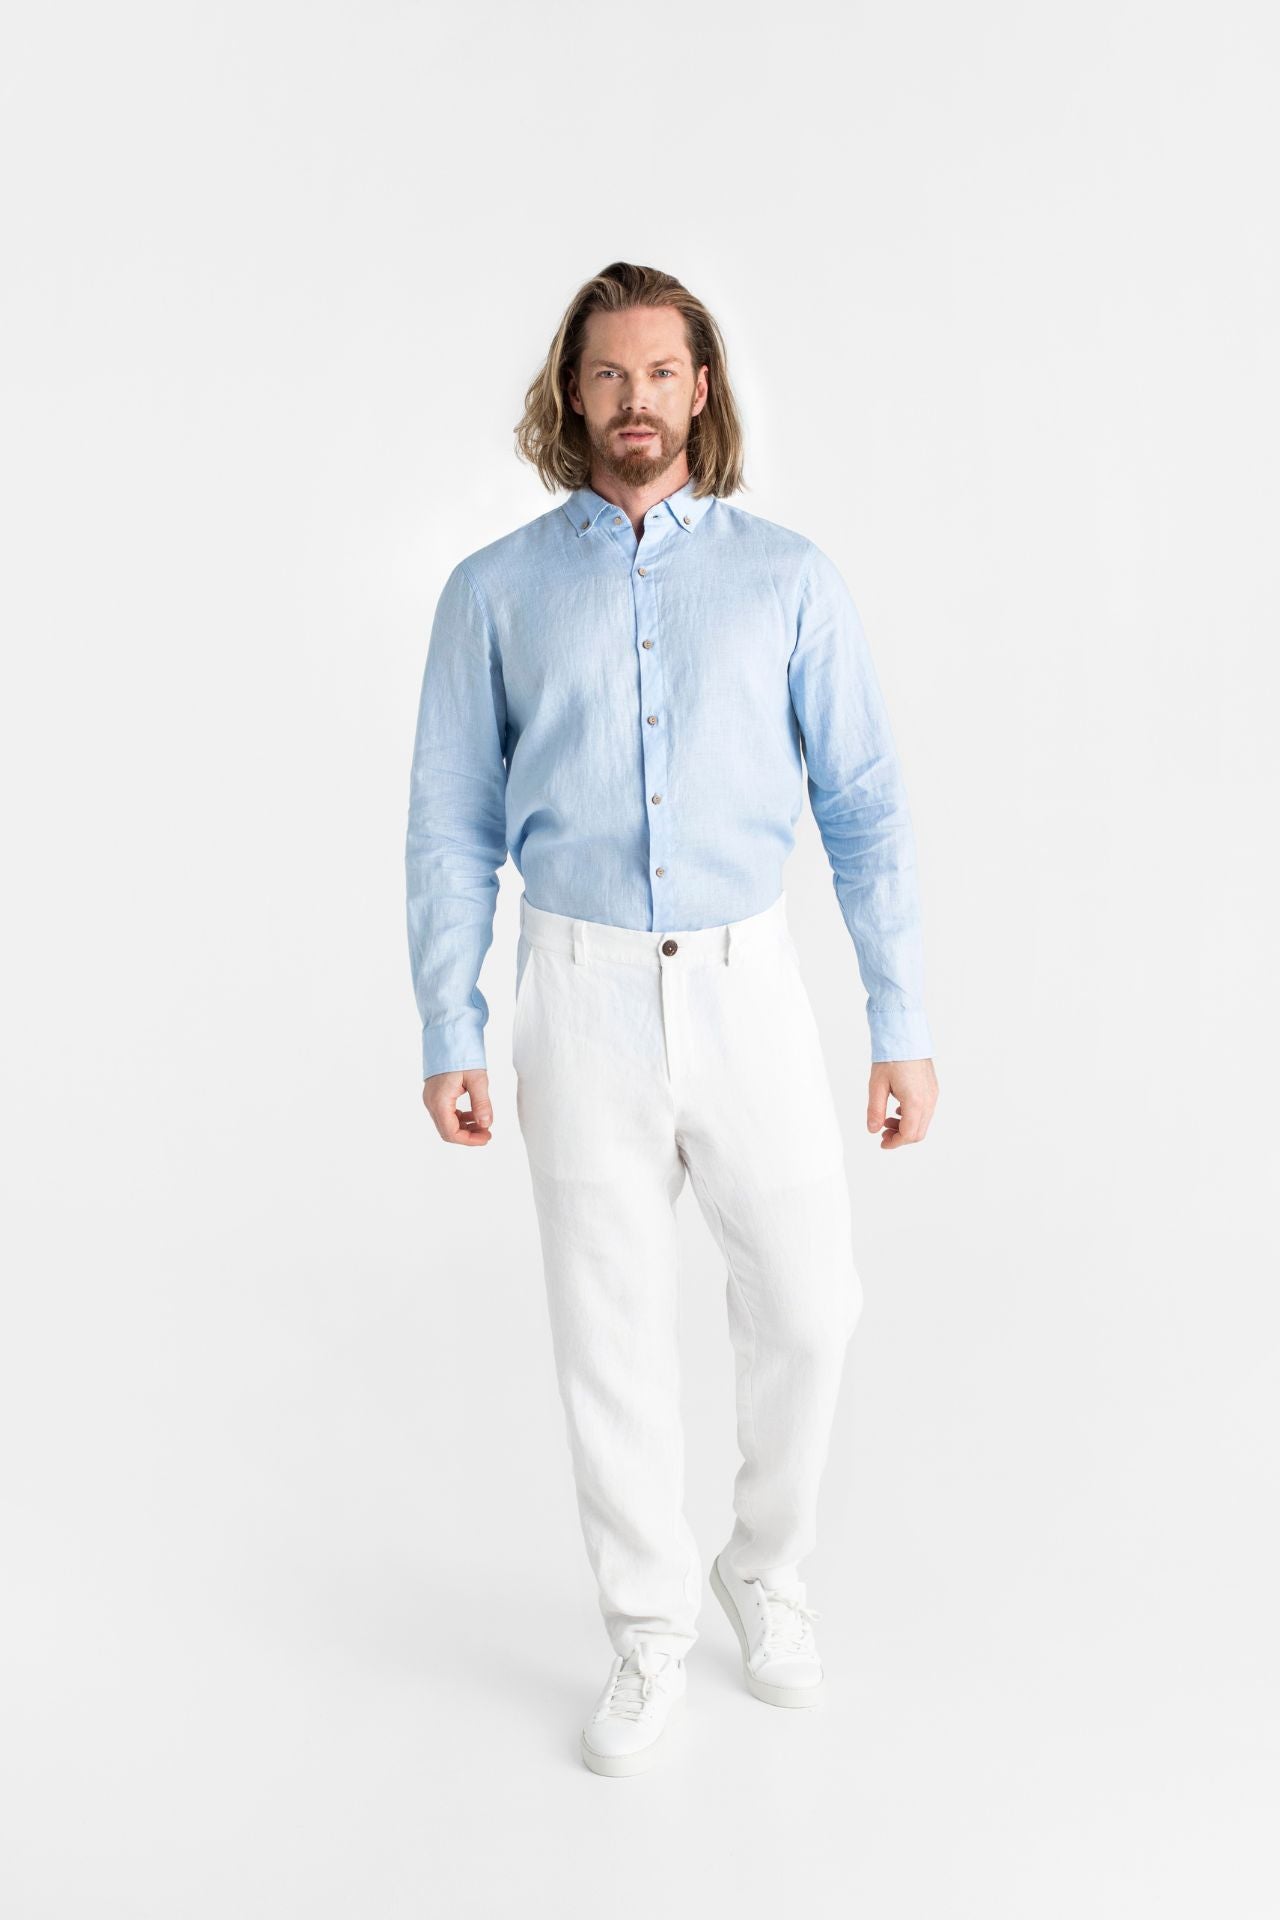 Shop timeless sky blue men's linen shirt, a wardrobe essential for the hot summer months. This sky blue men's linen shirt is a high-quality shirt and will add sophistication this summer. Perfect linen shirt for summer, holidays and formal wear. Extra breathable linen shirt for trendy men. The best gift for fathers Day.